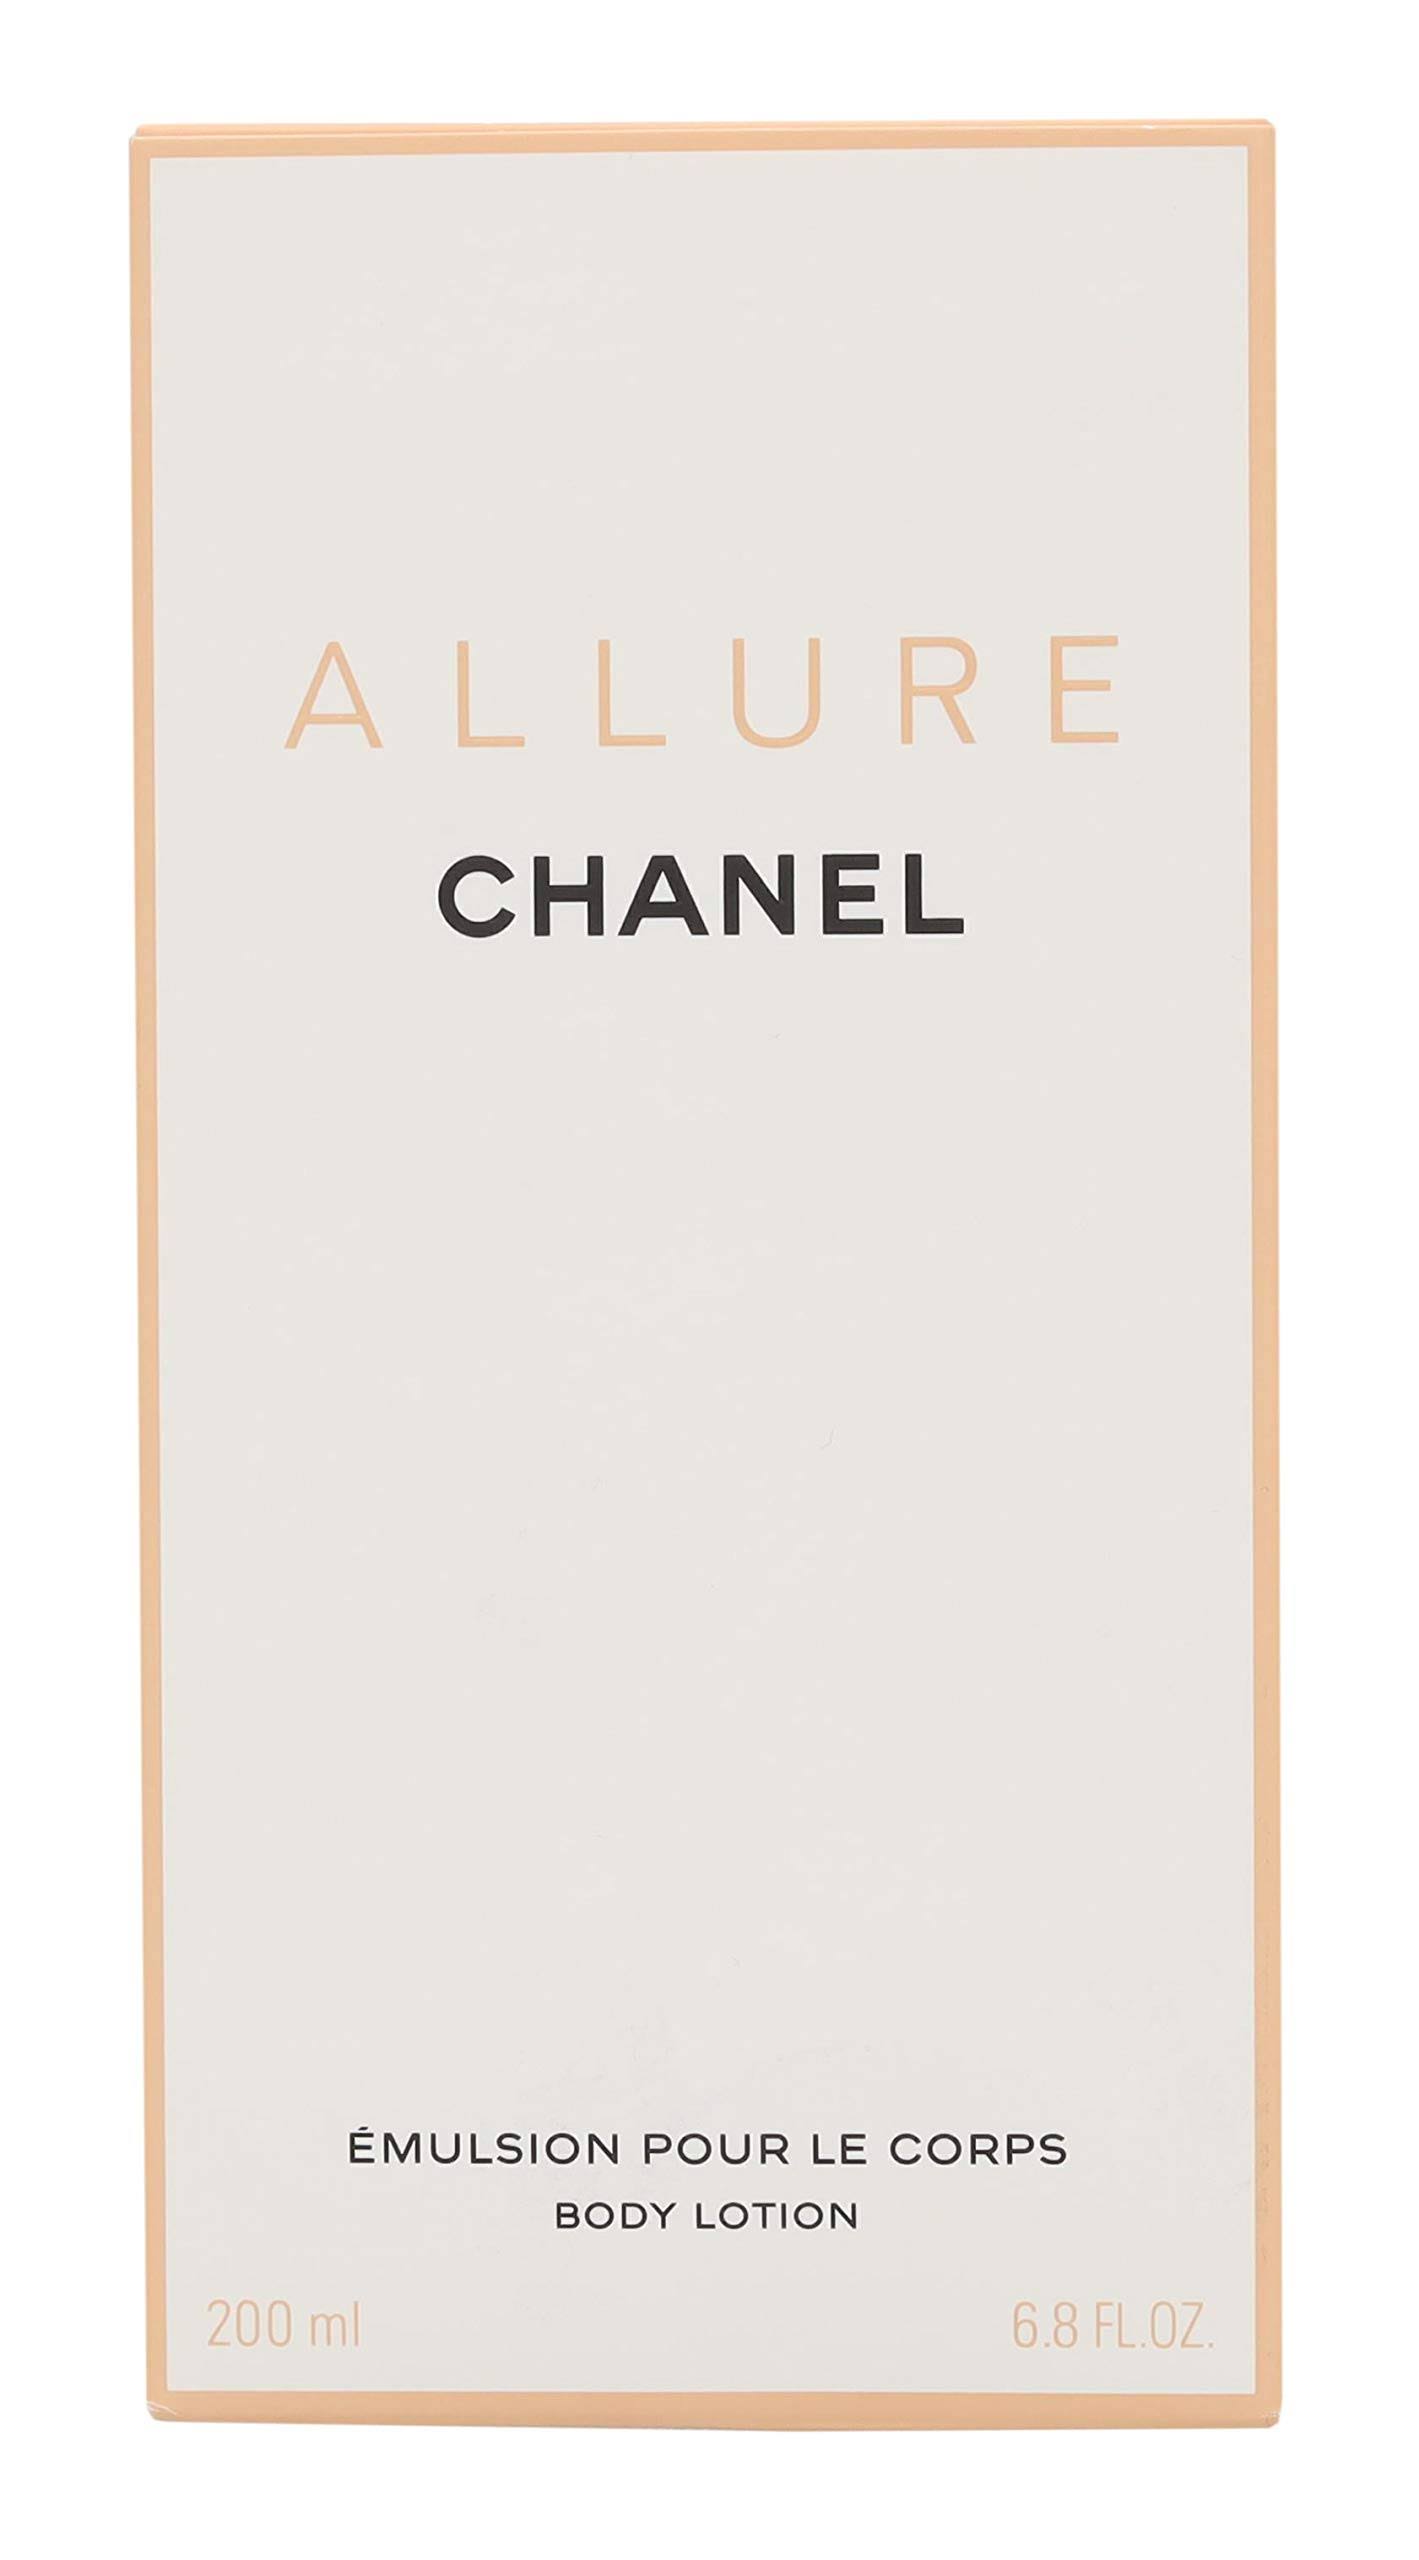 CHANEL ALLURE for Women Body Lotion 6.8oz #9403 India